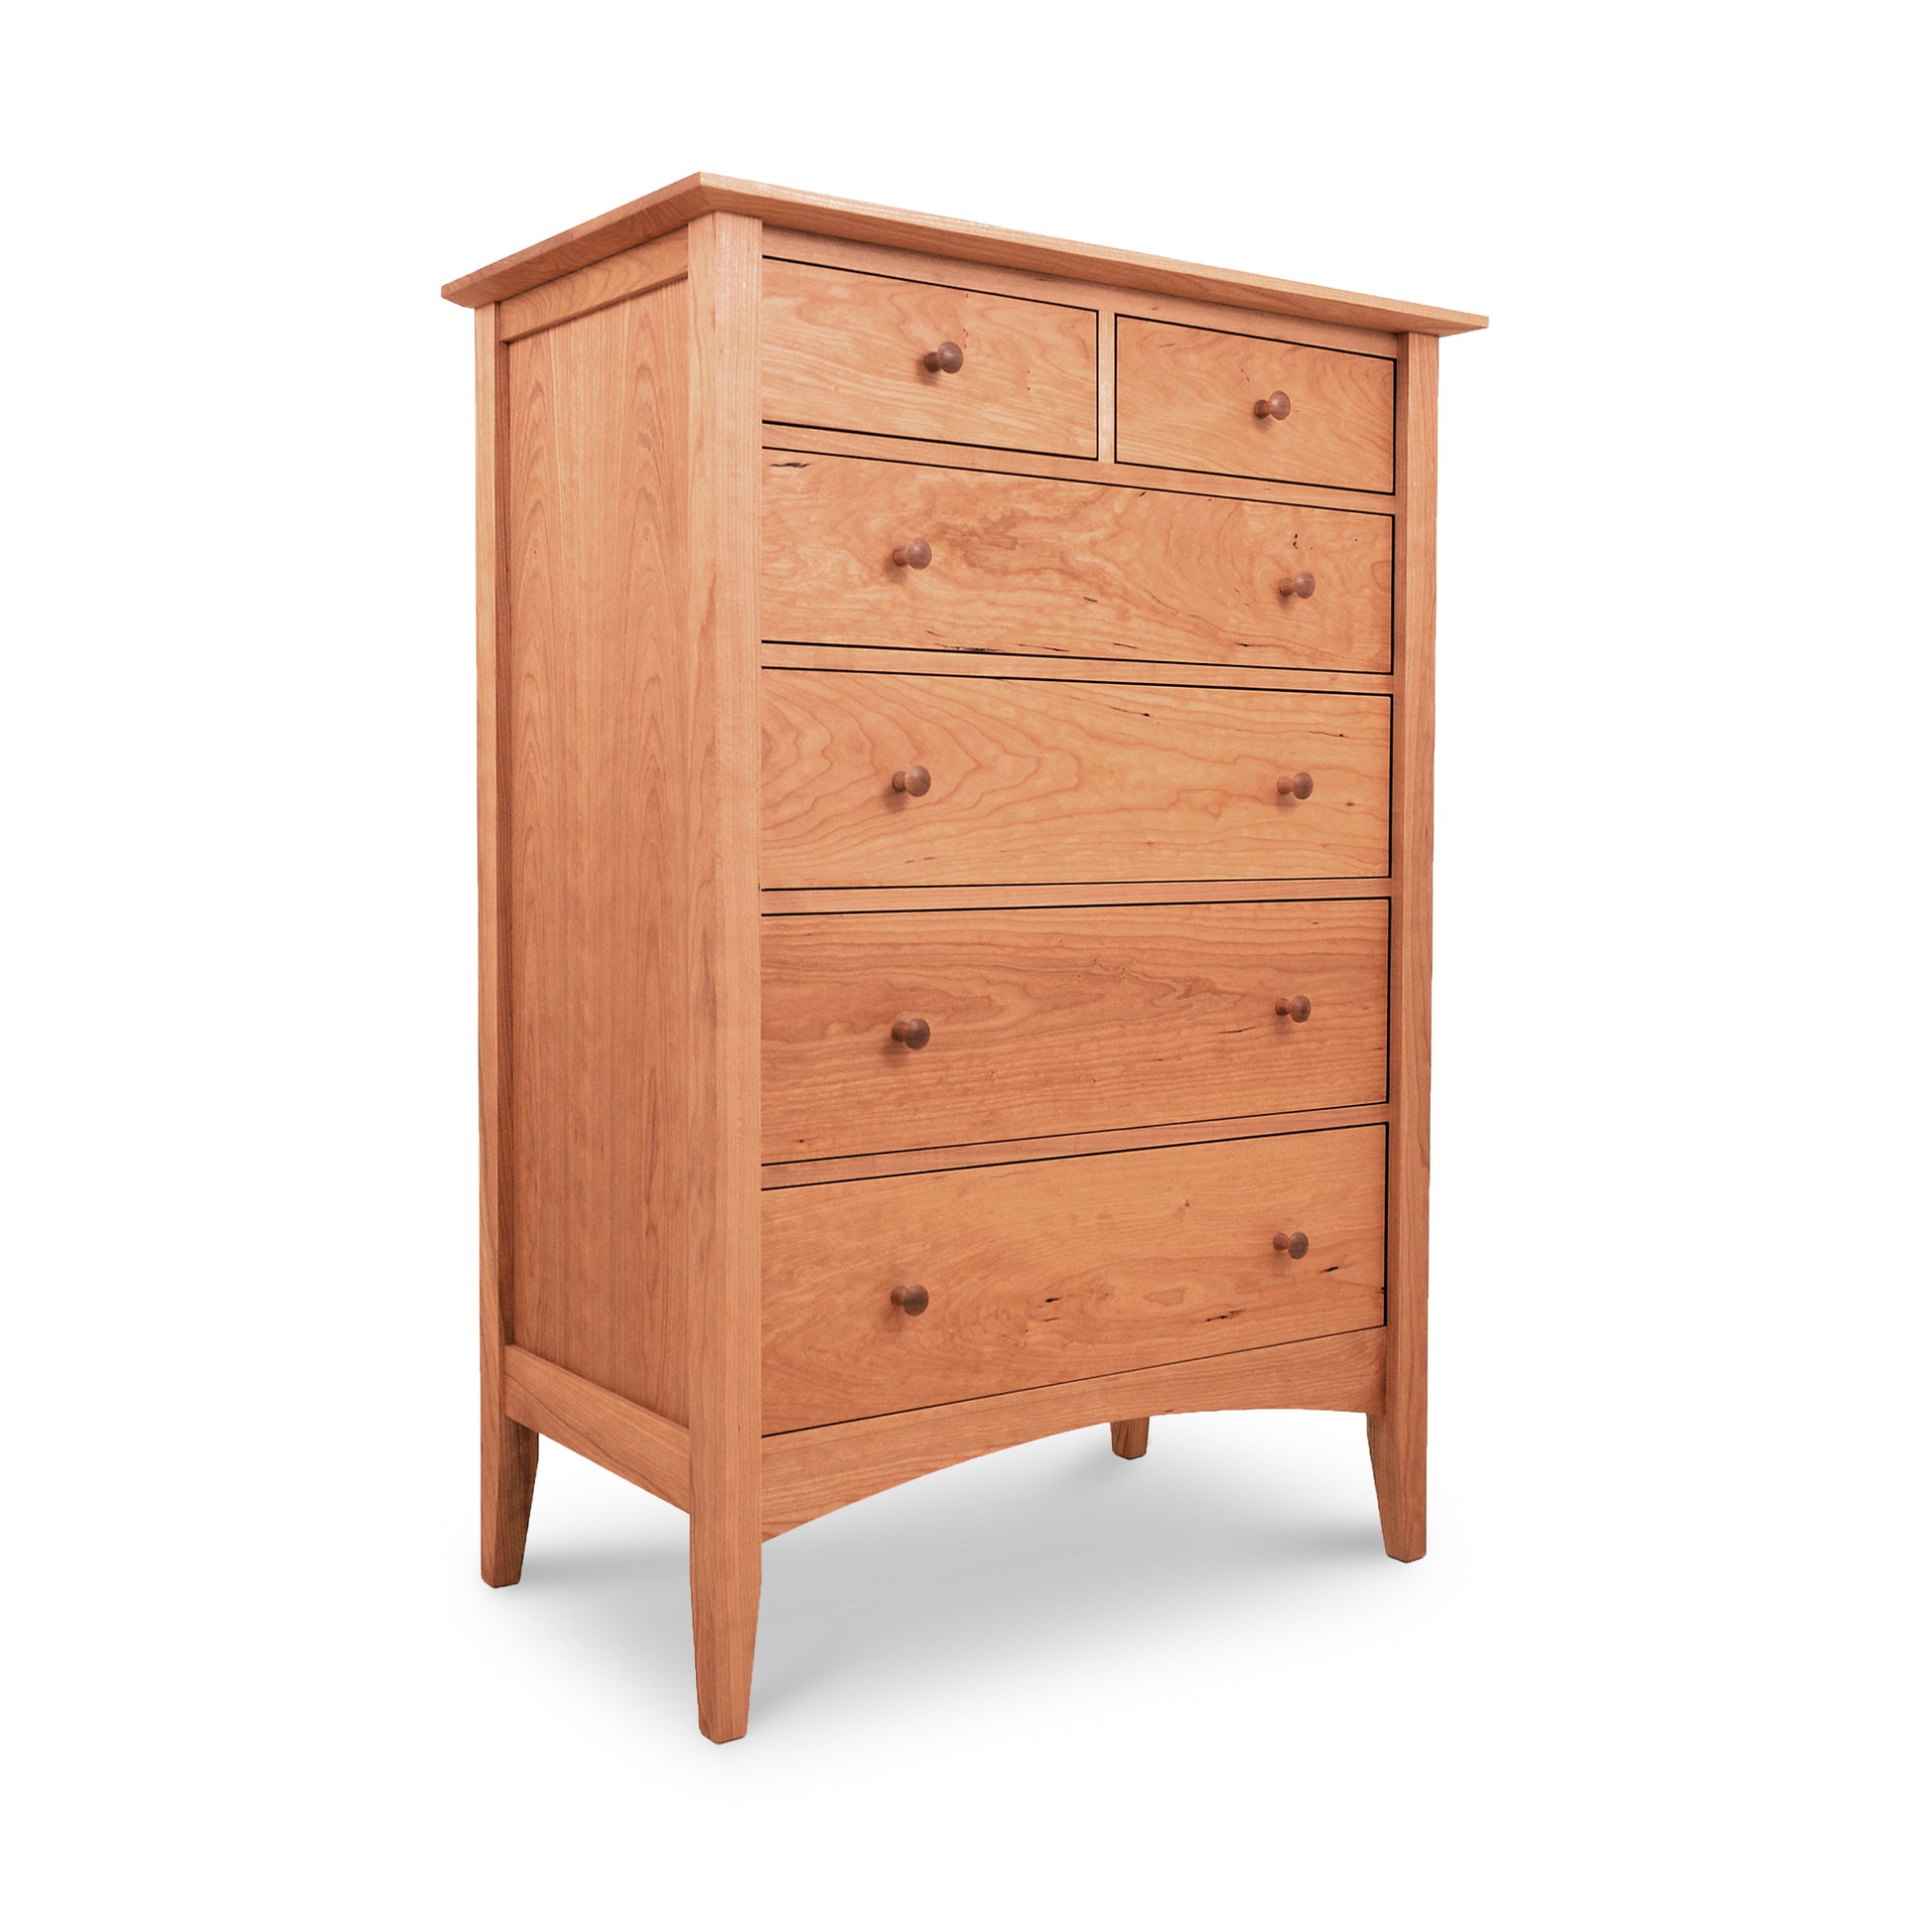 A Maple Corner Woodworks American Shaker 6-Drawer Chest with six drawers, featuring a simple design and round knobs on a white background.